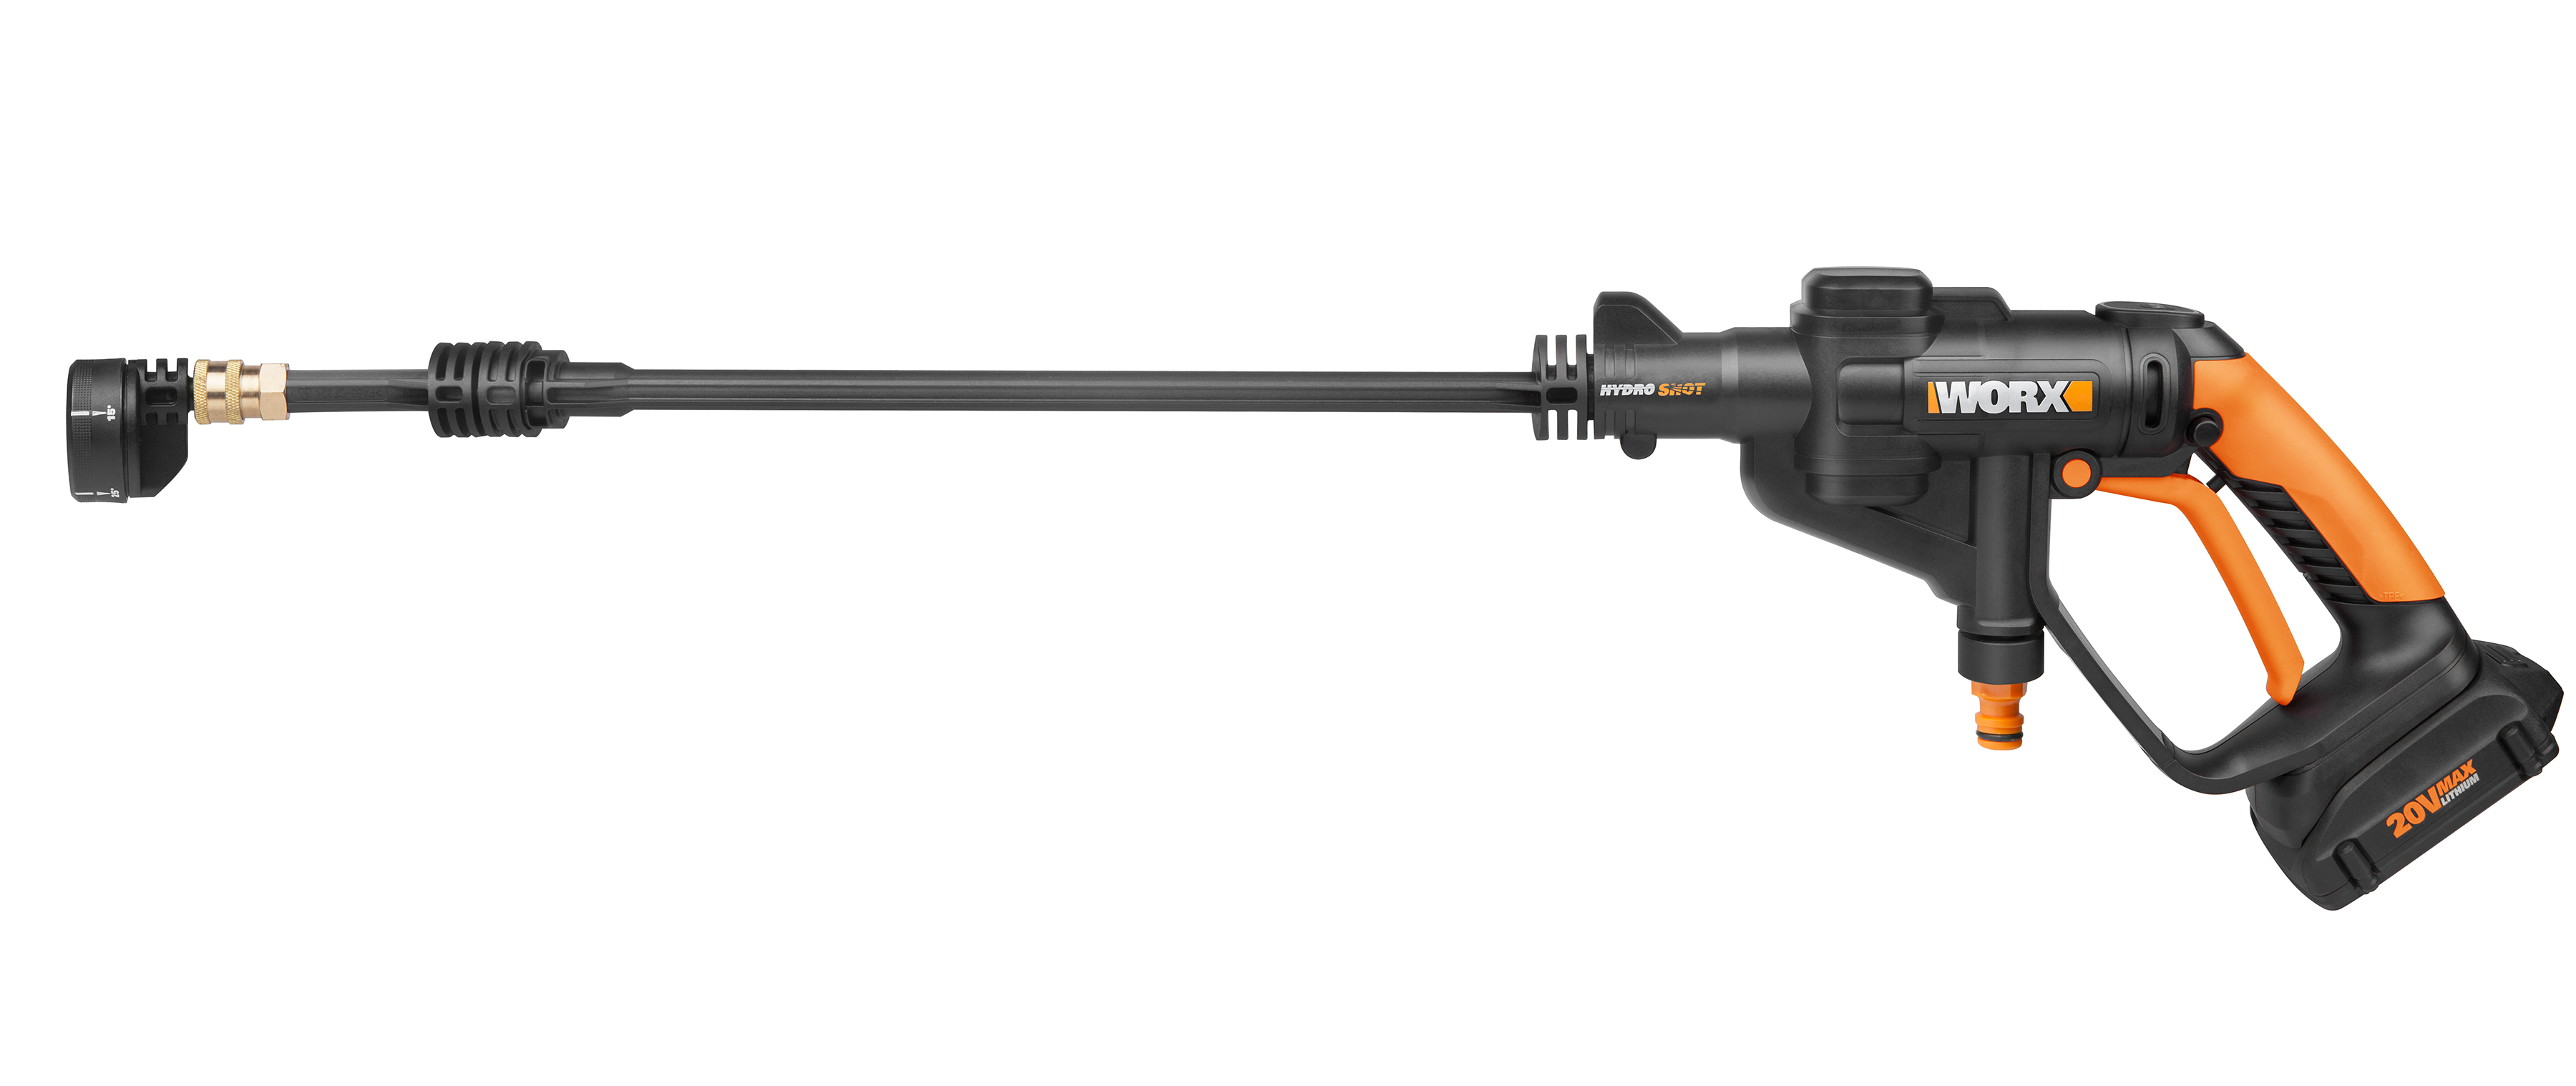 WORX Hydroshot with extension wand to improve accuracy, reach and control.